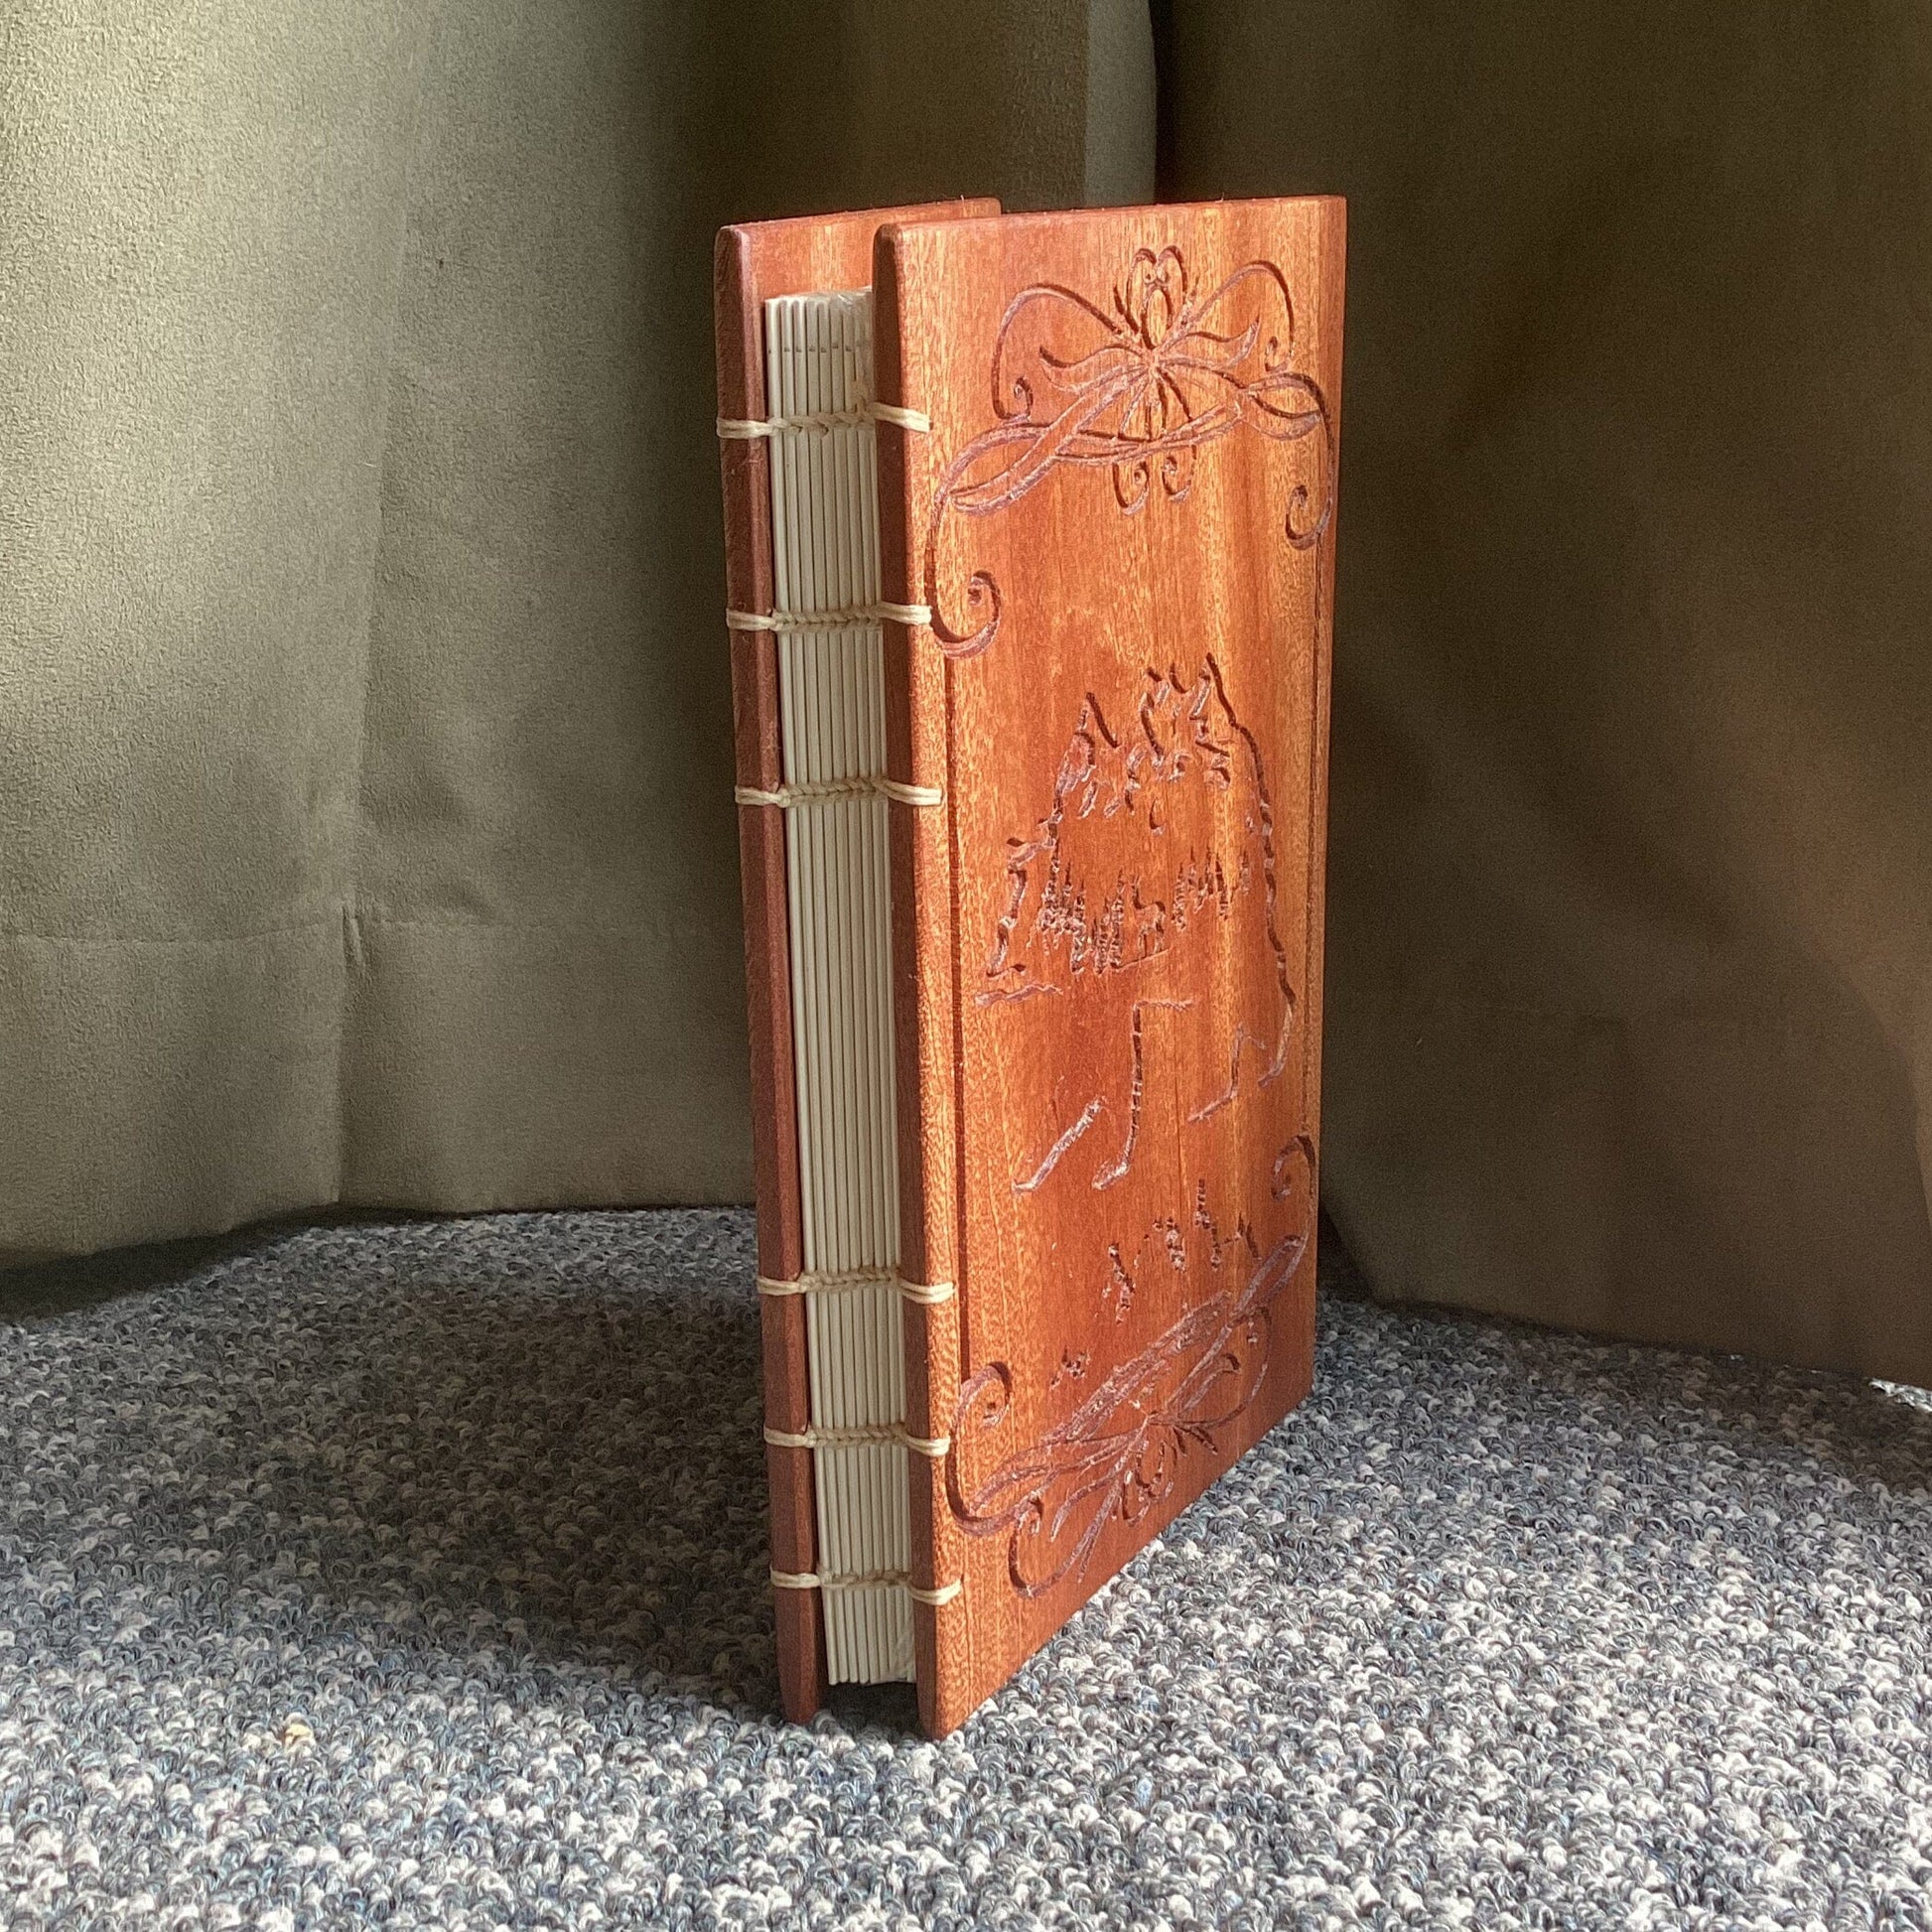 Engraved Personalized Journal, Bear, Canadian, Christmas Gift, Birthday gift, Sapele (Mahogany), Coptic Stitched Custom Carved Journals, Guest Books, Journals and Notebooks 8th Line Creations 